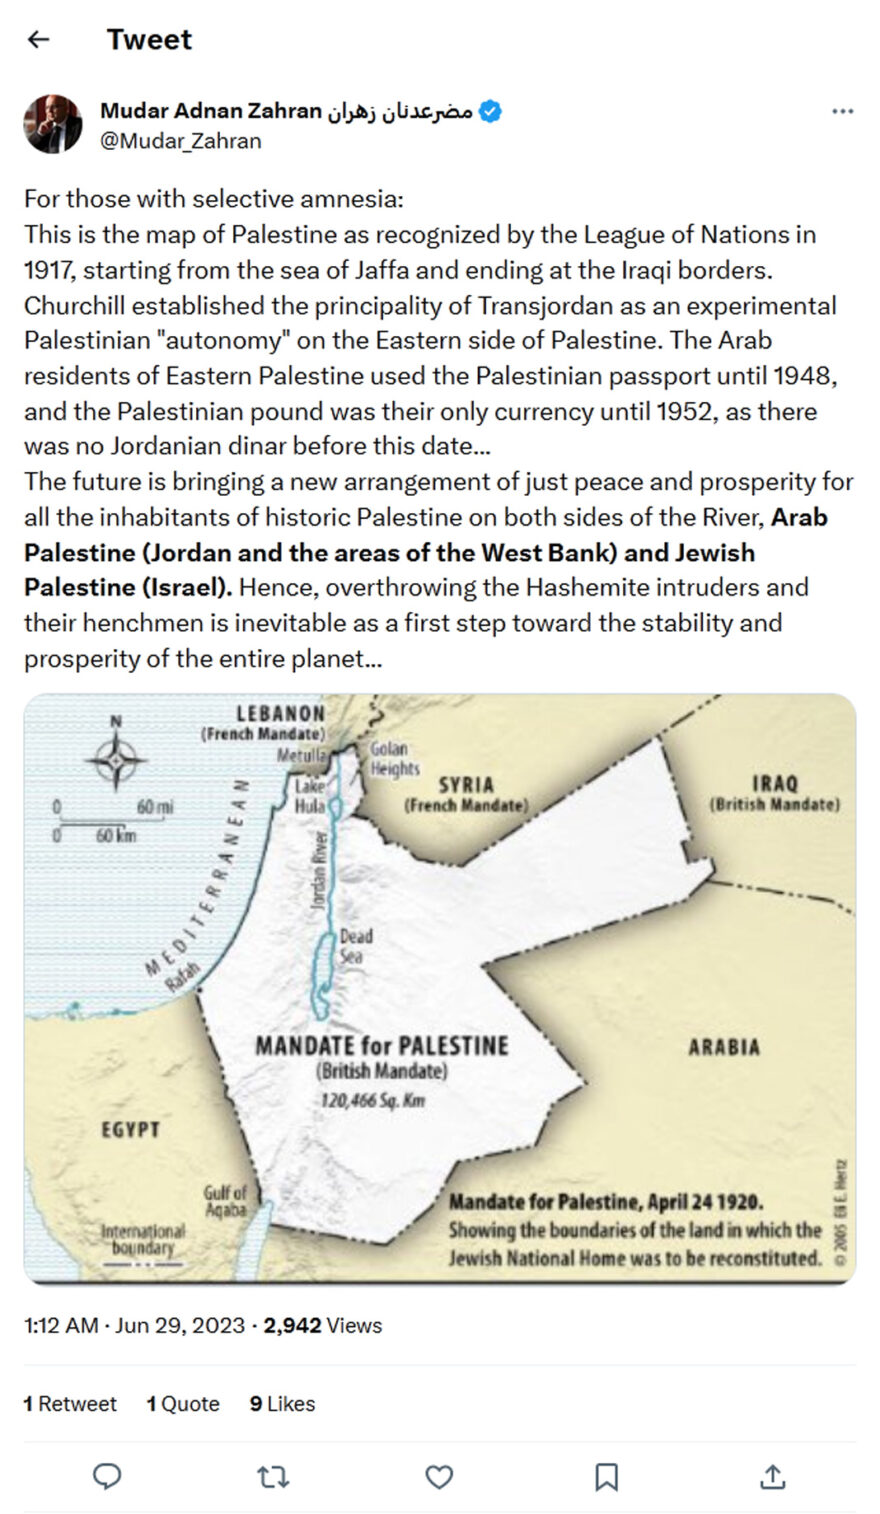 Mudar Adnan Zahran-tweet-28June2023-This is the map of Palestine as recognized by the League of Nations in 1917